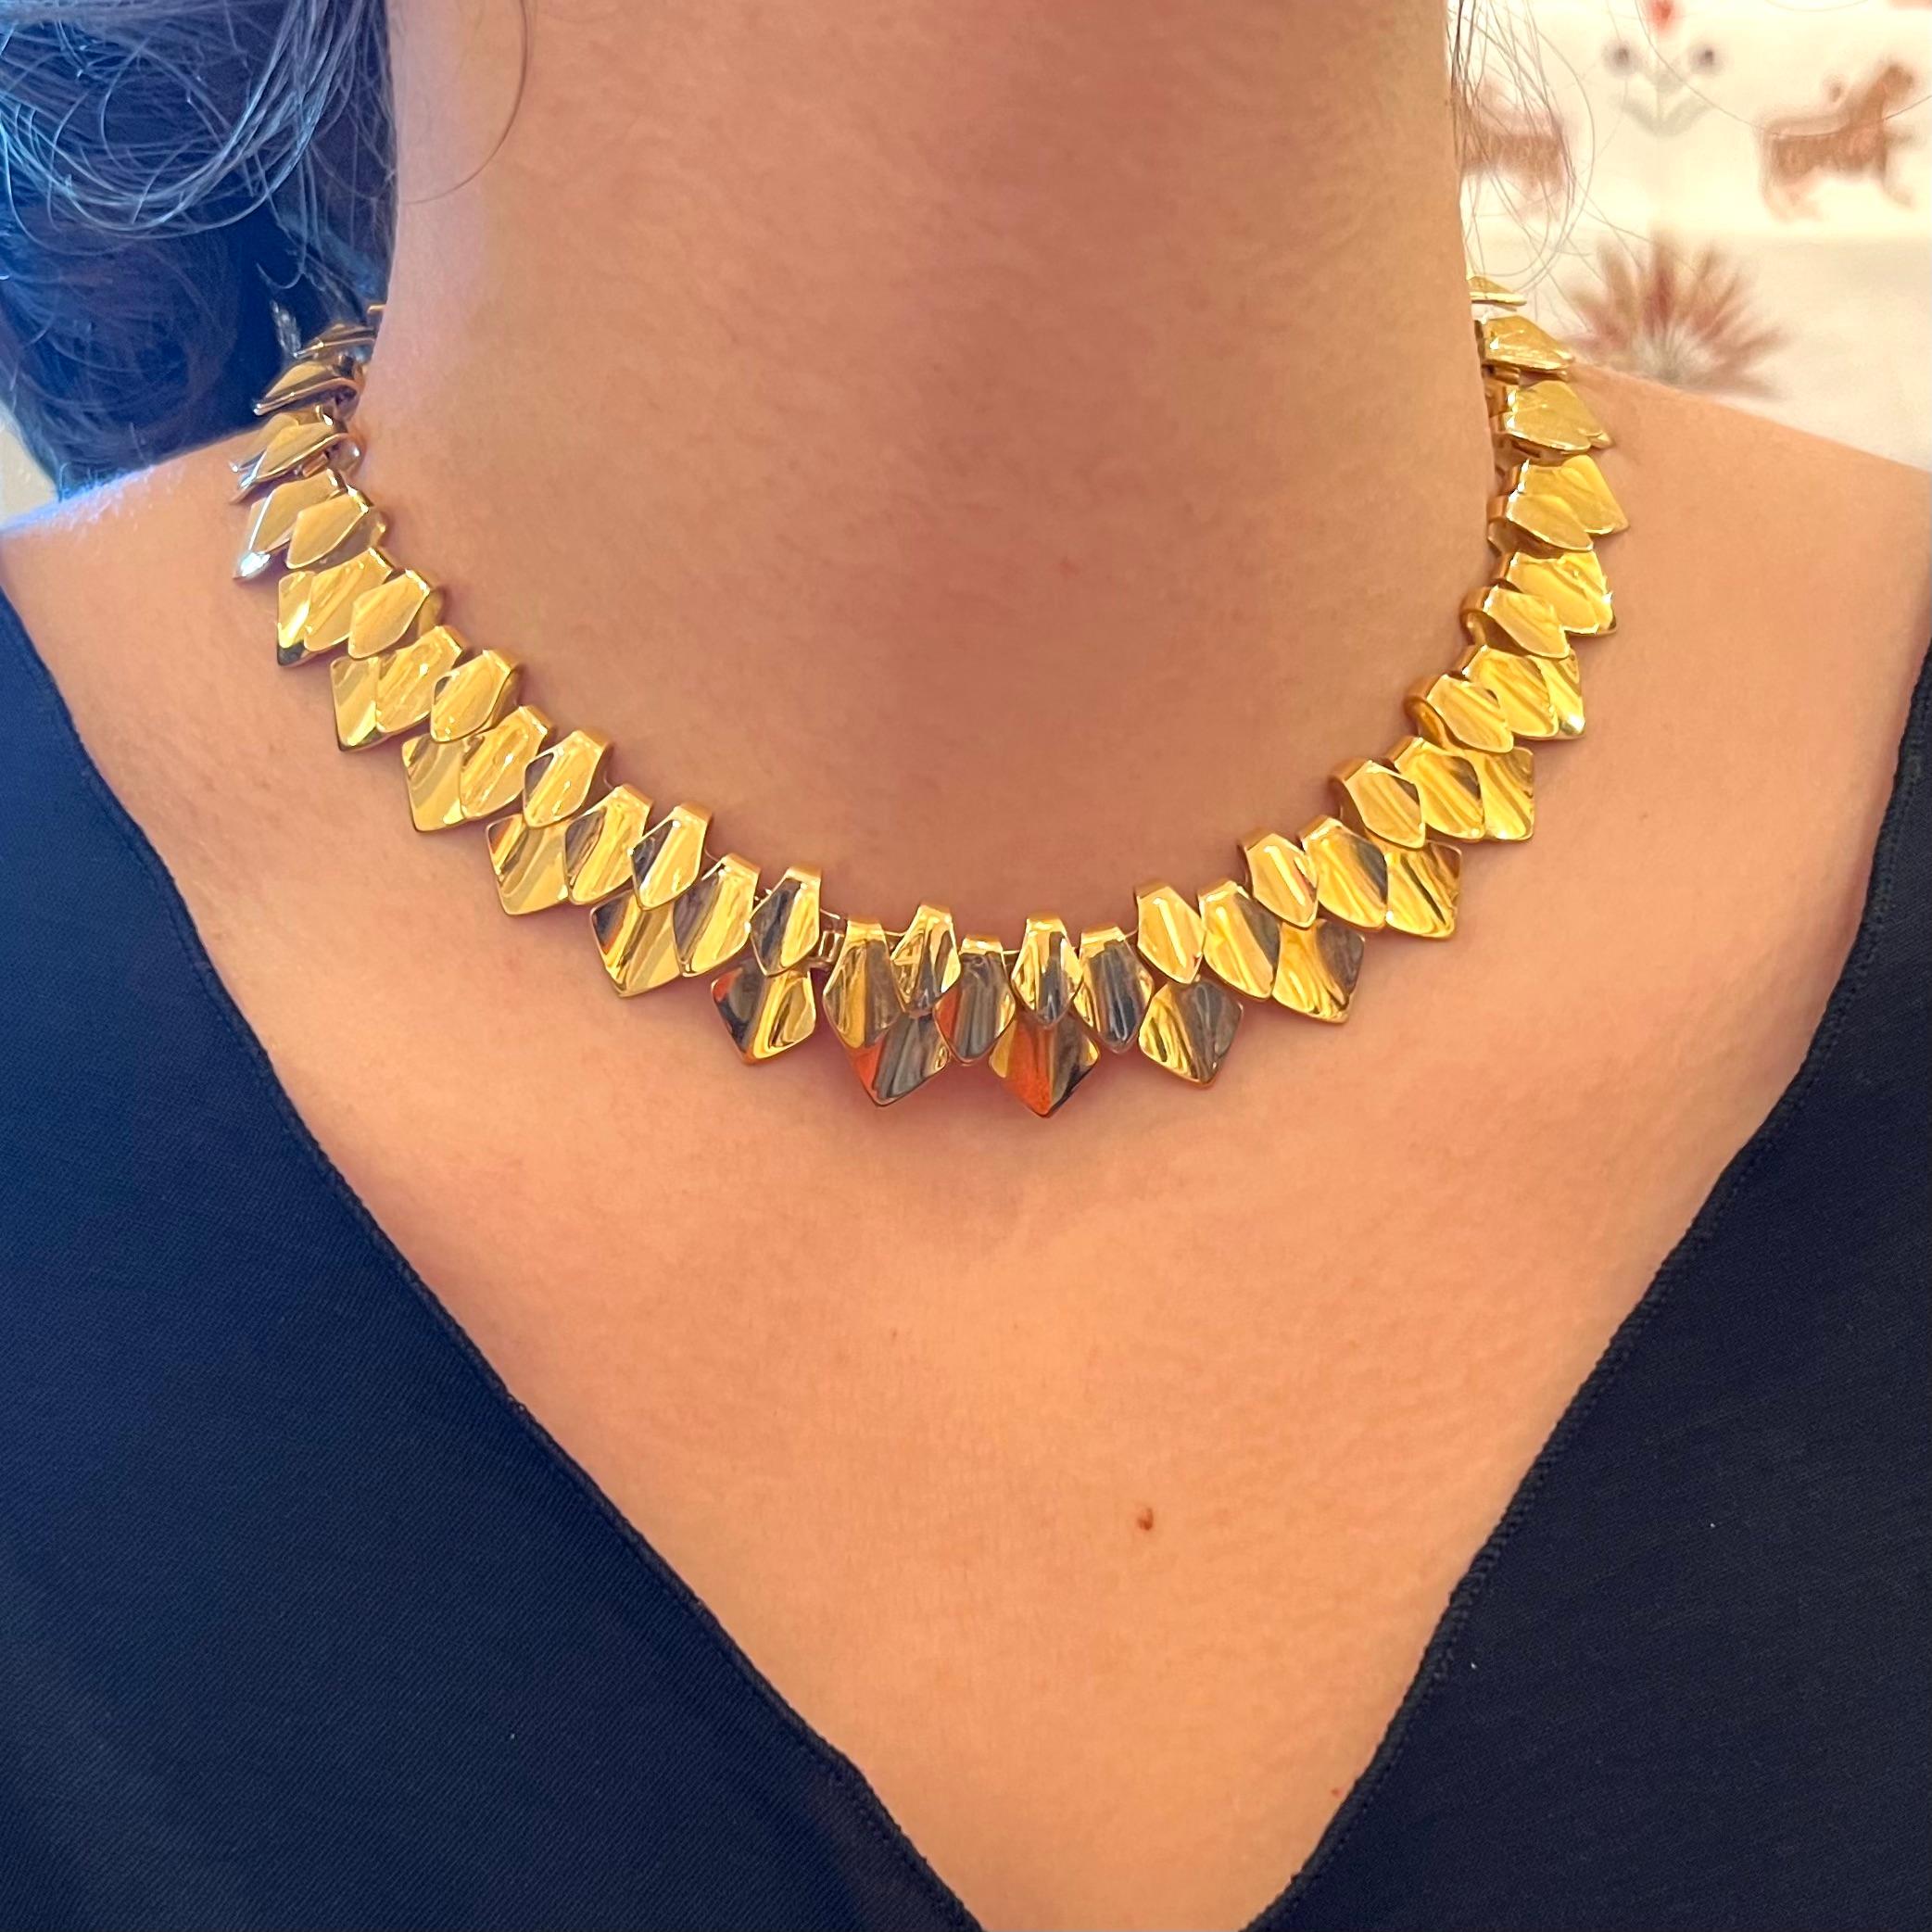 A rare and exquisite 18-karat yellow gold collar by Tuk Fischer for Georg Jensen, 1963
Stamped Georg Jensen, 18k, 750, numbered. 

An heirloom quality set along with the matching bracelet is also available. This rich gold collar is one of the most